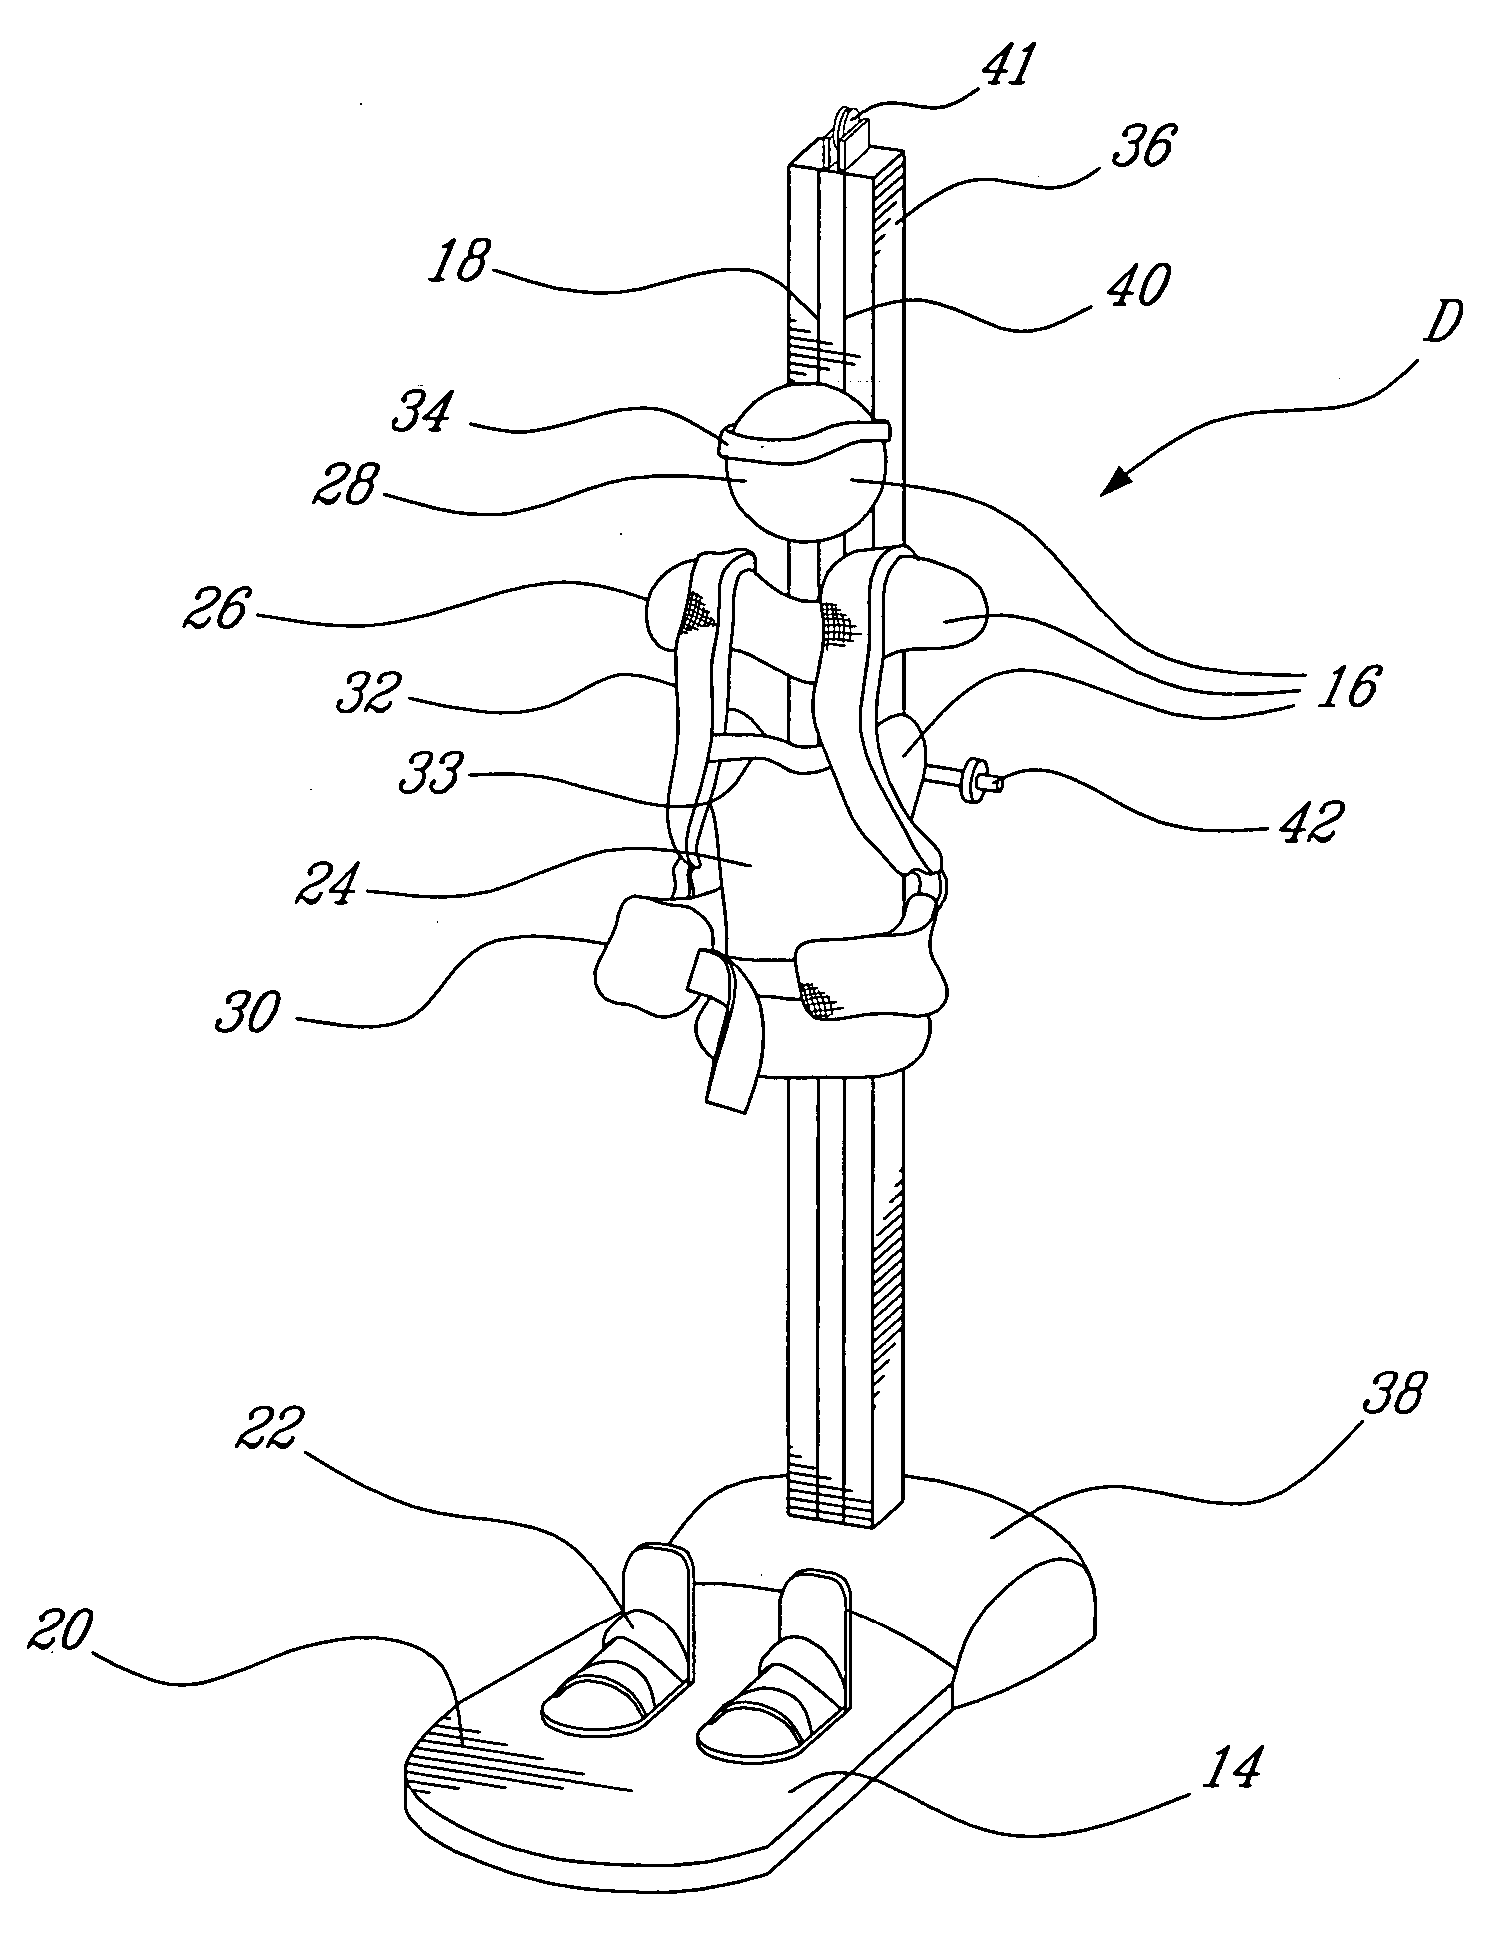 Hack squat gestural guiding apparatus in view of a standardized evaluation of the tridimensional kinematics of the knee